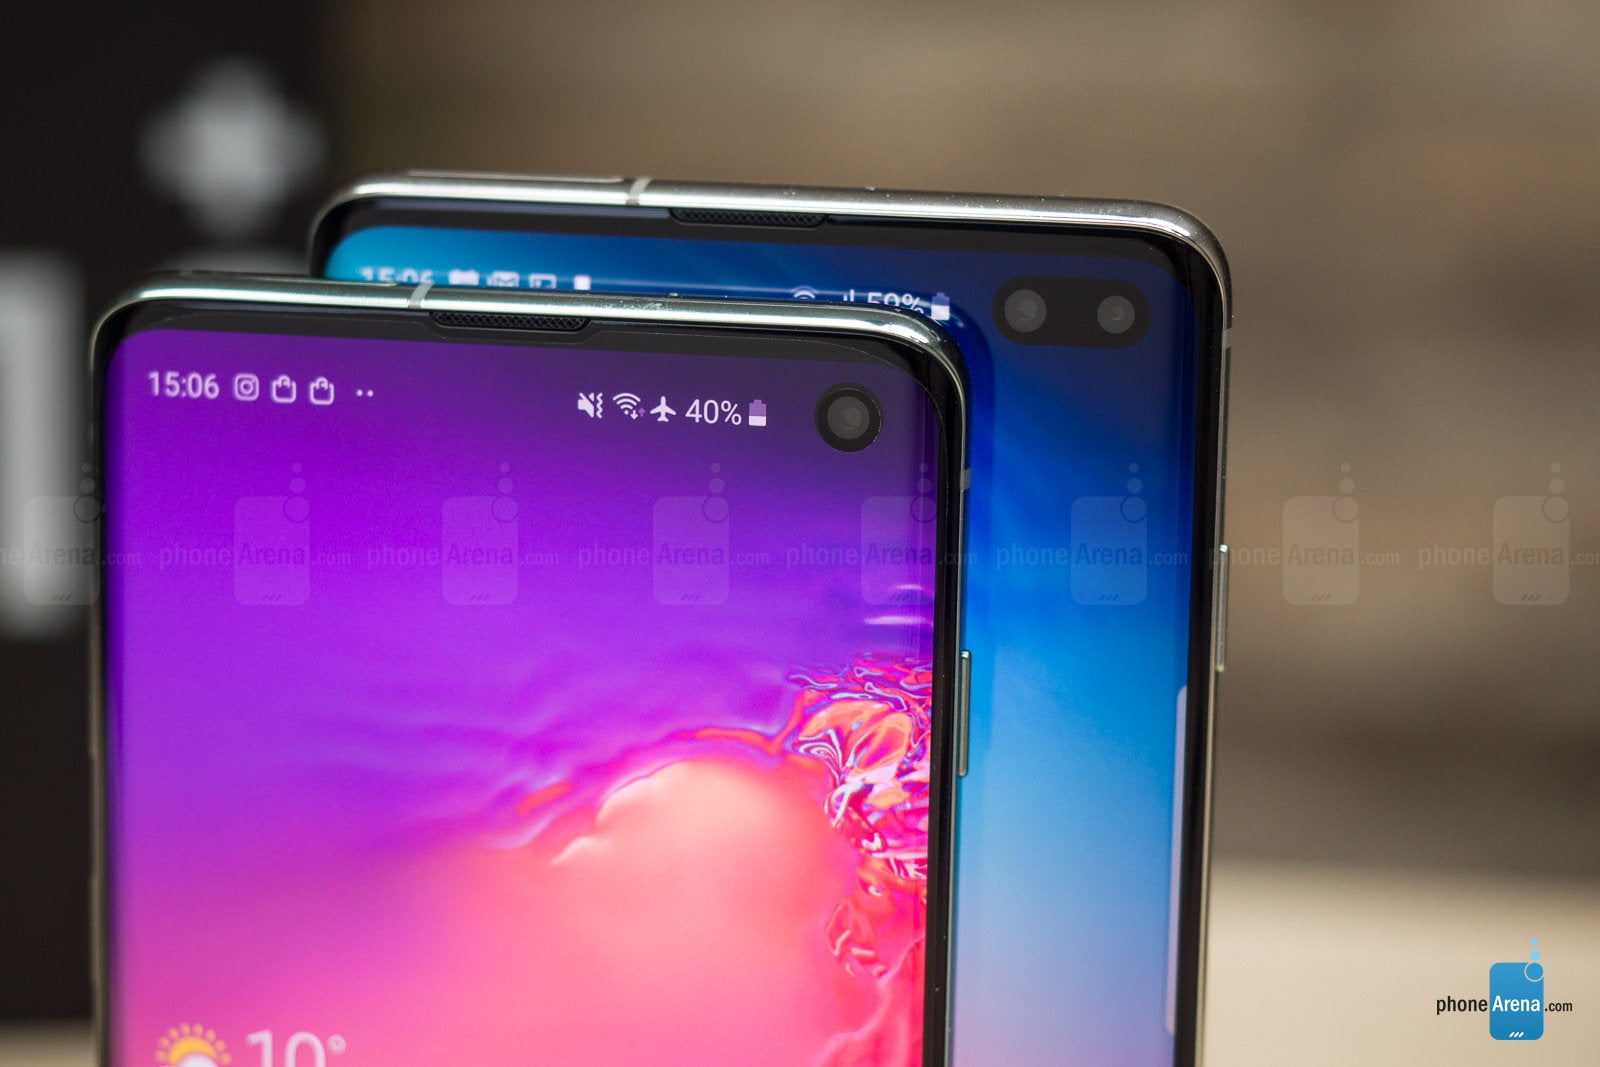 The Galaxy S10 &amp; S10+ - Samsung's Galaxy S11 might skip the cool design everyone wants